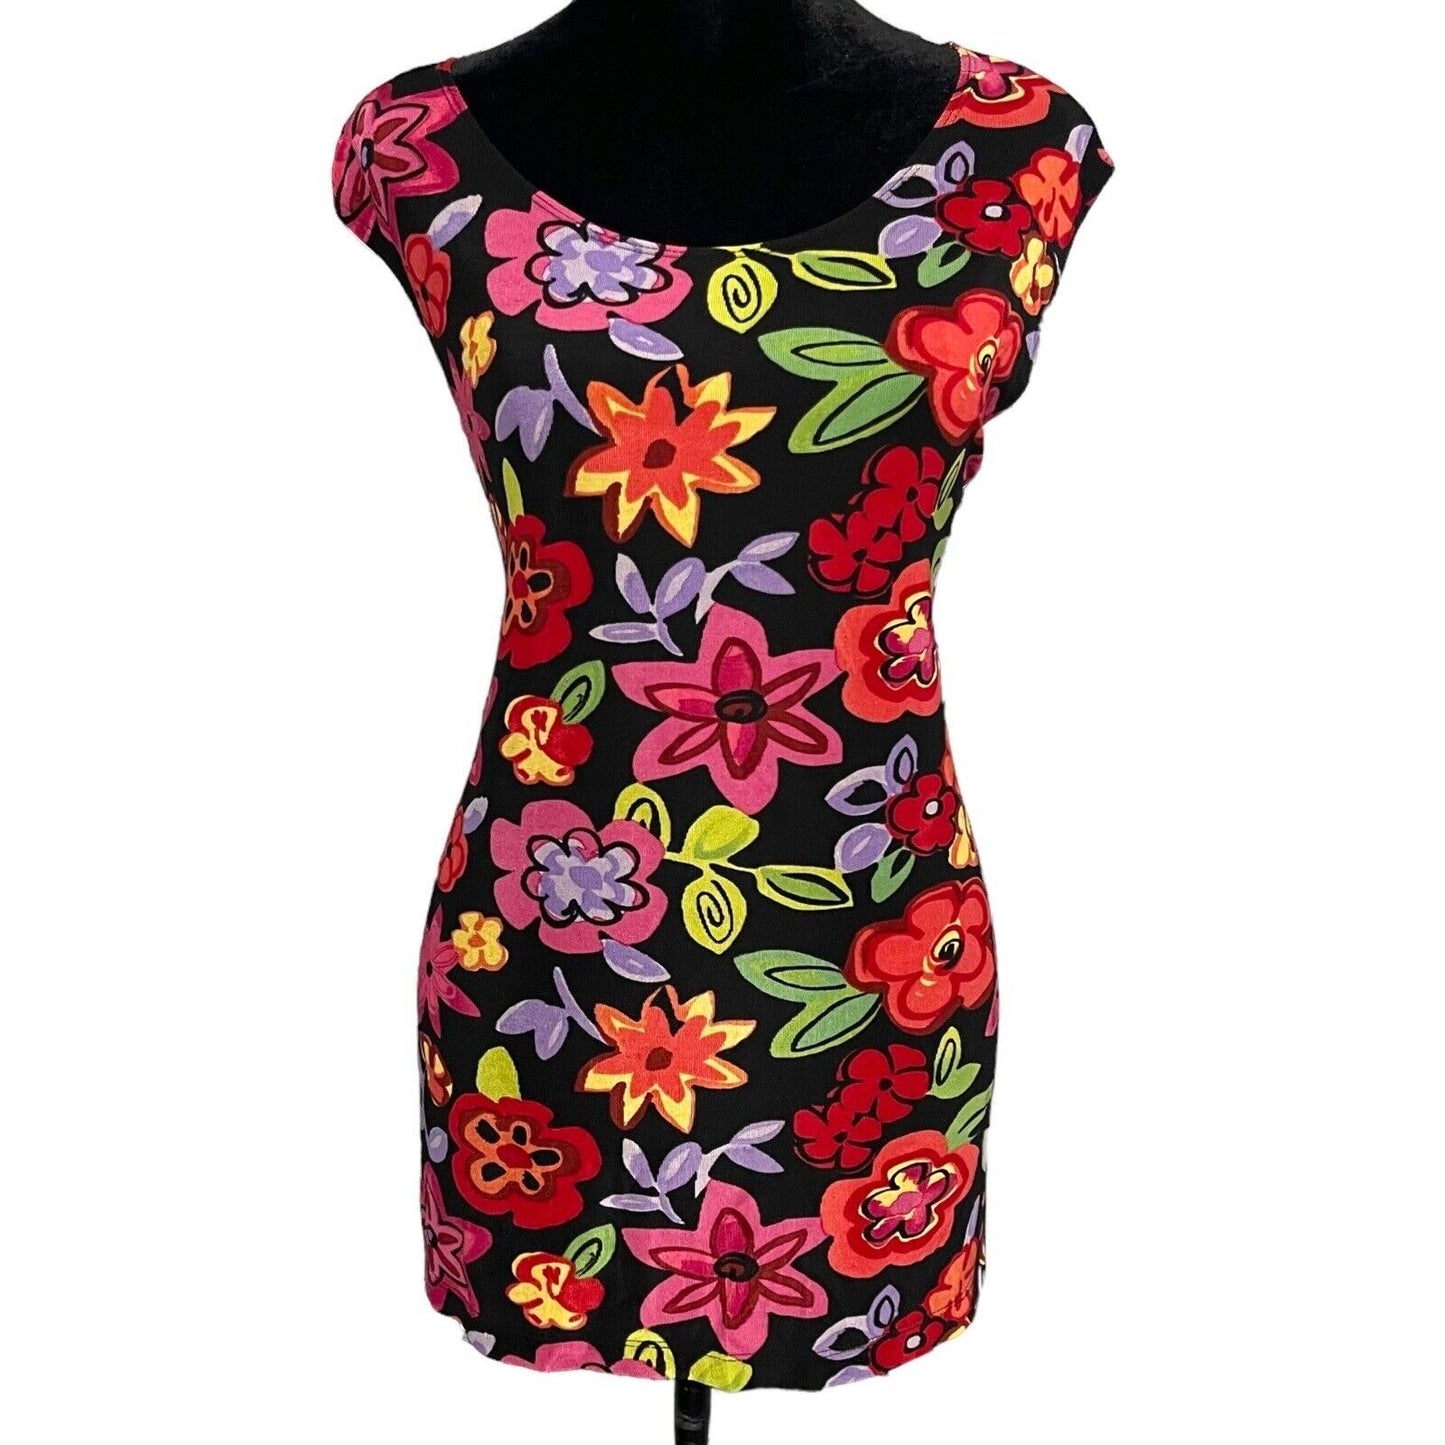 Choices Women's Multicolored Blouse Plus Size 3X Floral Print Stretch Sleeveless